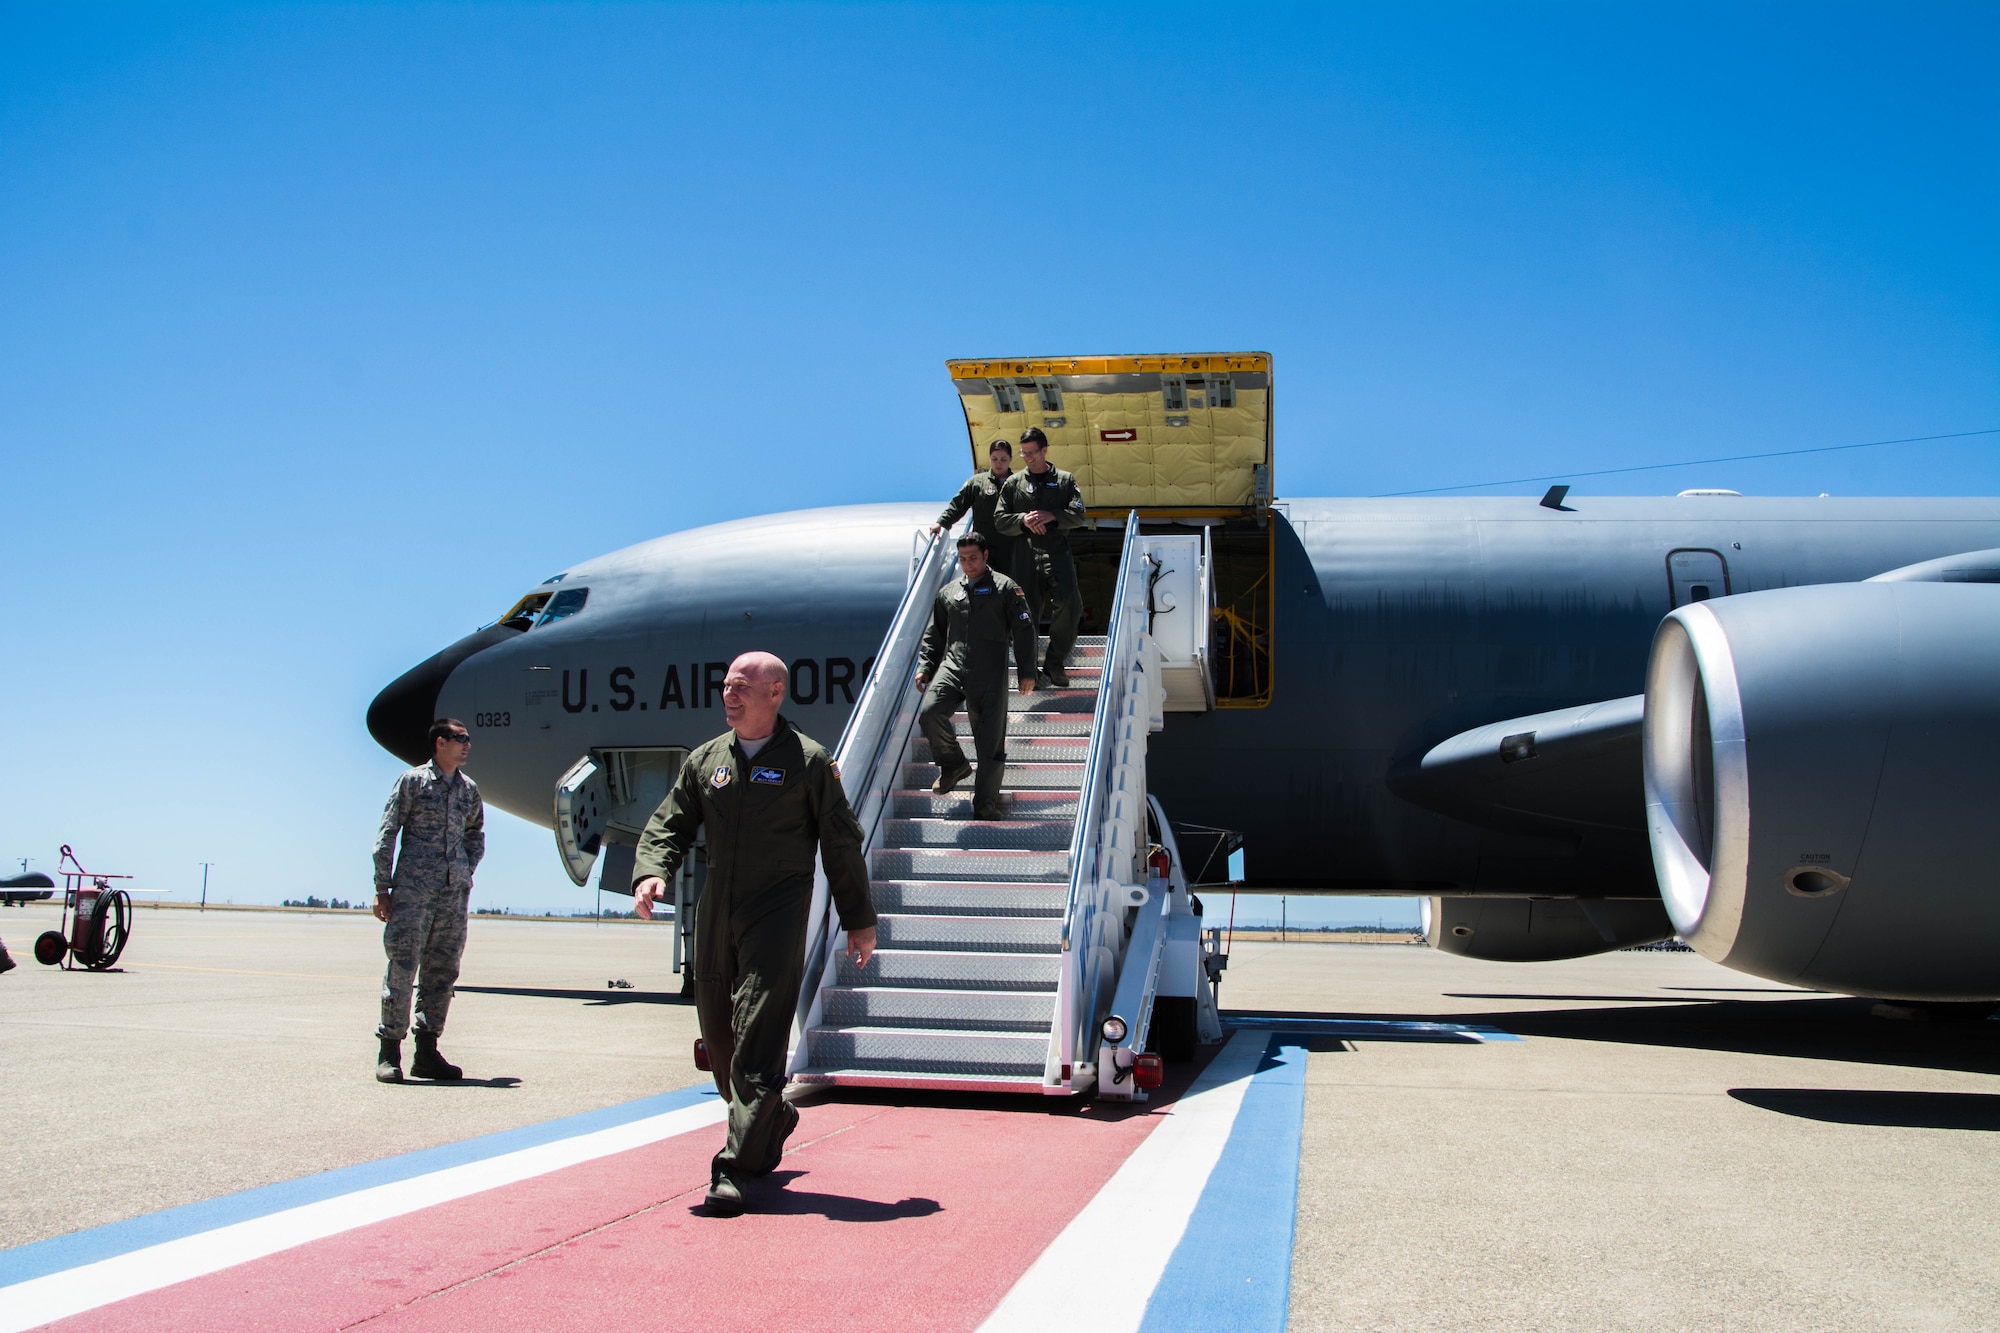 Col. Richard Heaslip, 940th Operations Group commander, along with his crew steps off the first of eight KC-135 Stratotankers to arrive at Beale Air Force Base, California on July 10, 2016. The 940th Air Refueling Wing was re-designated from the 940th Wing during an official ceremony on June 4, 2016. The seven remaining KC-135 aircraft are anticipated to arrive in the next coming months. (Courtesy photo by John L. Brackens)